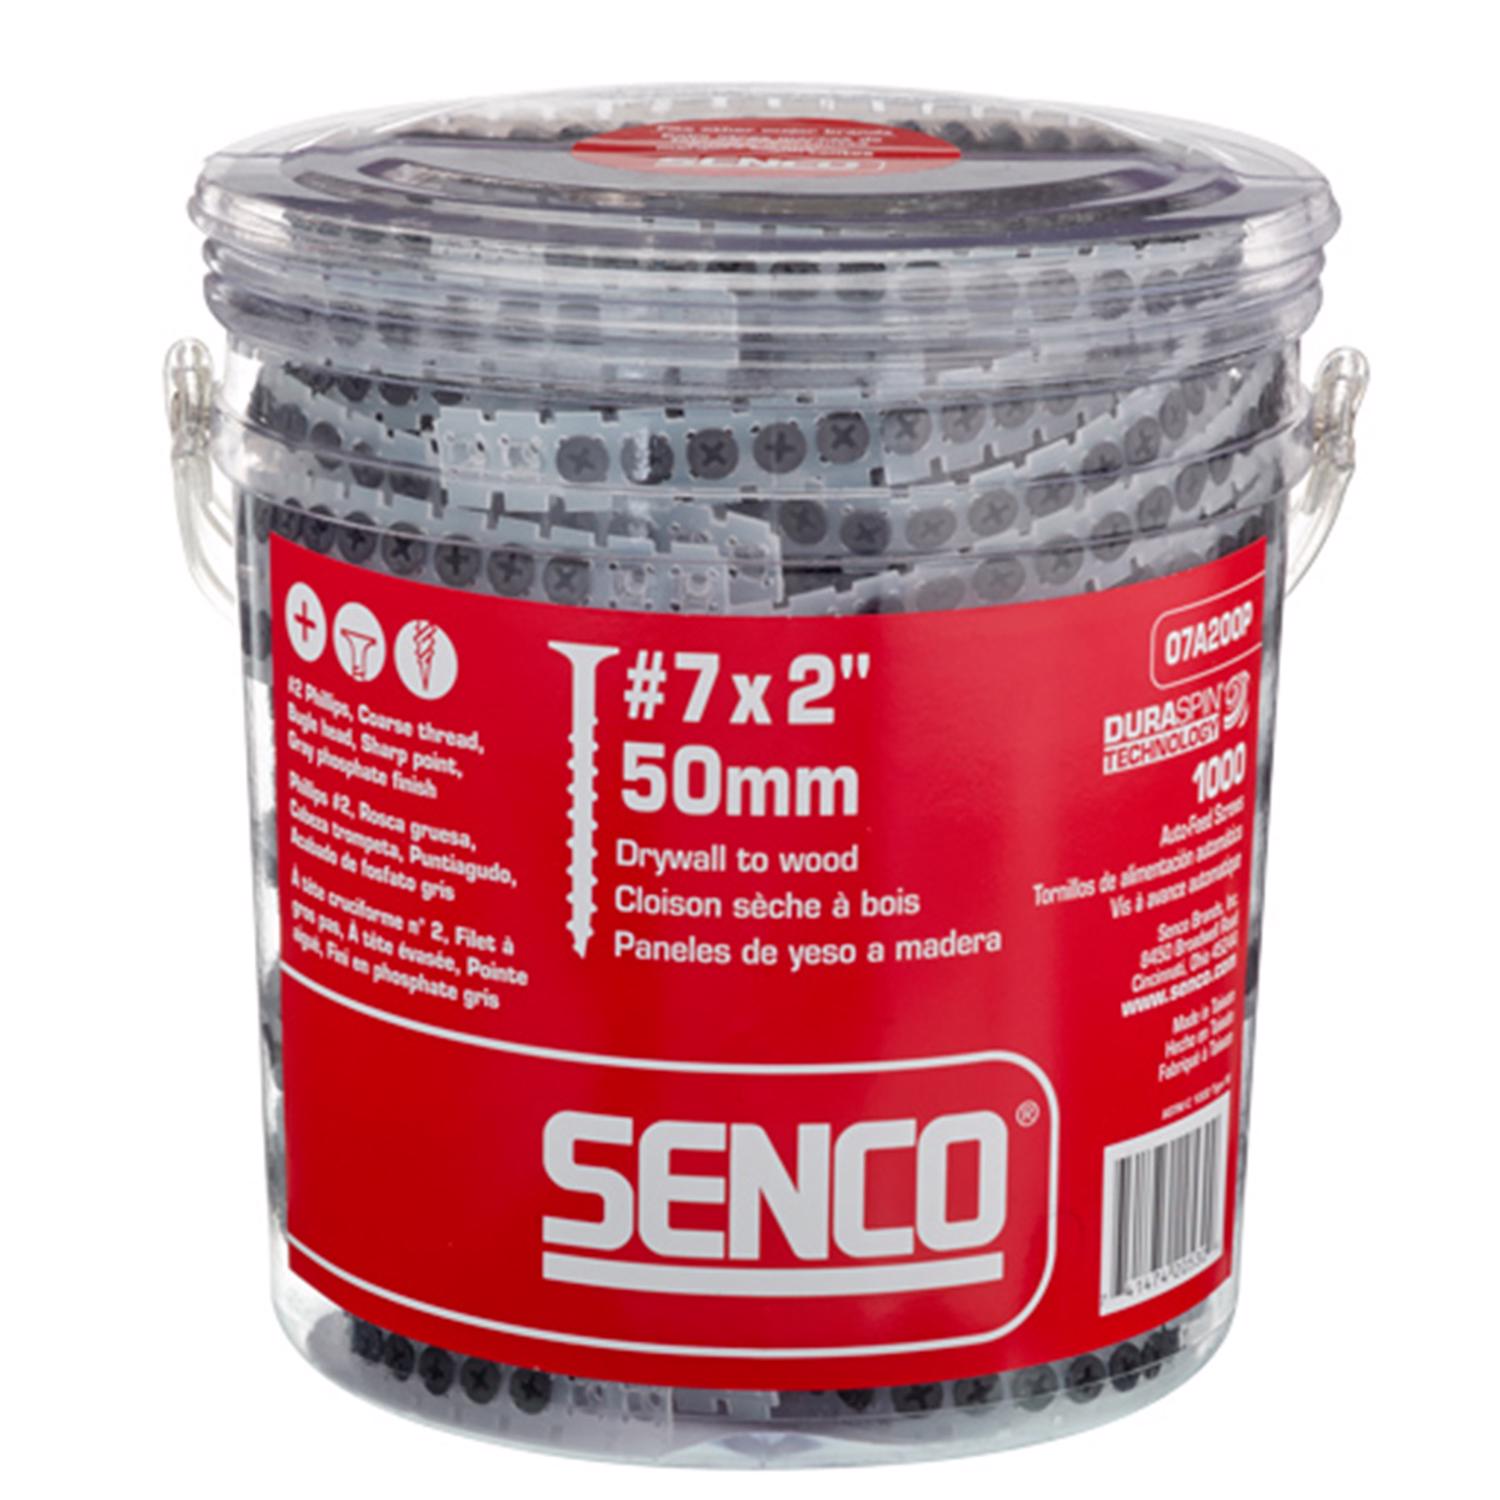 Photos - Nail / Screw / Fastener Senco DuraSpin No. 7 Sizes X 2 in. L Phillips Coarse Collated Drywall Scre 